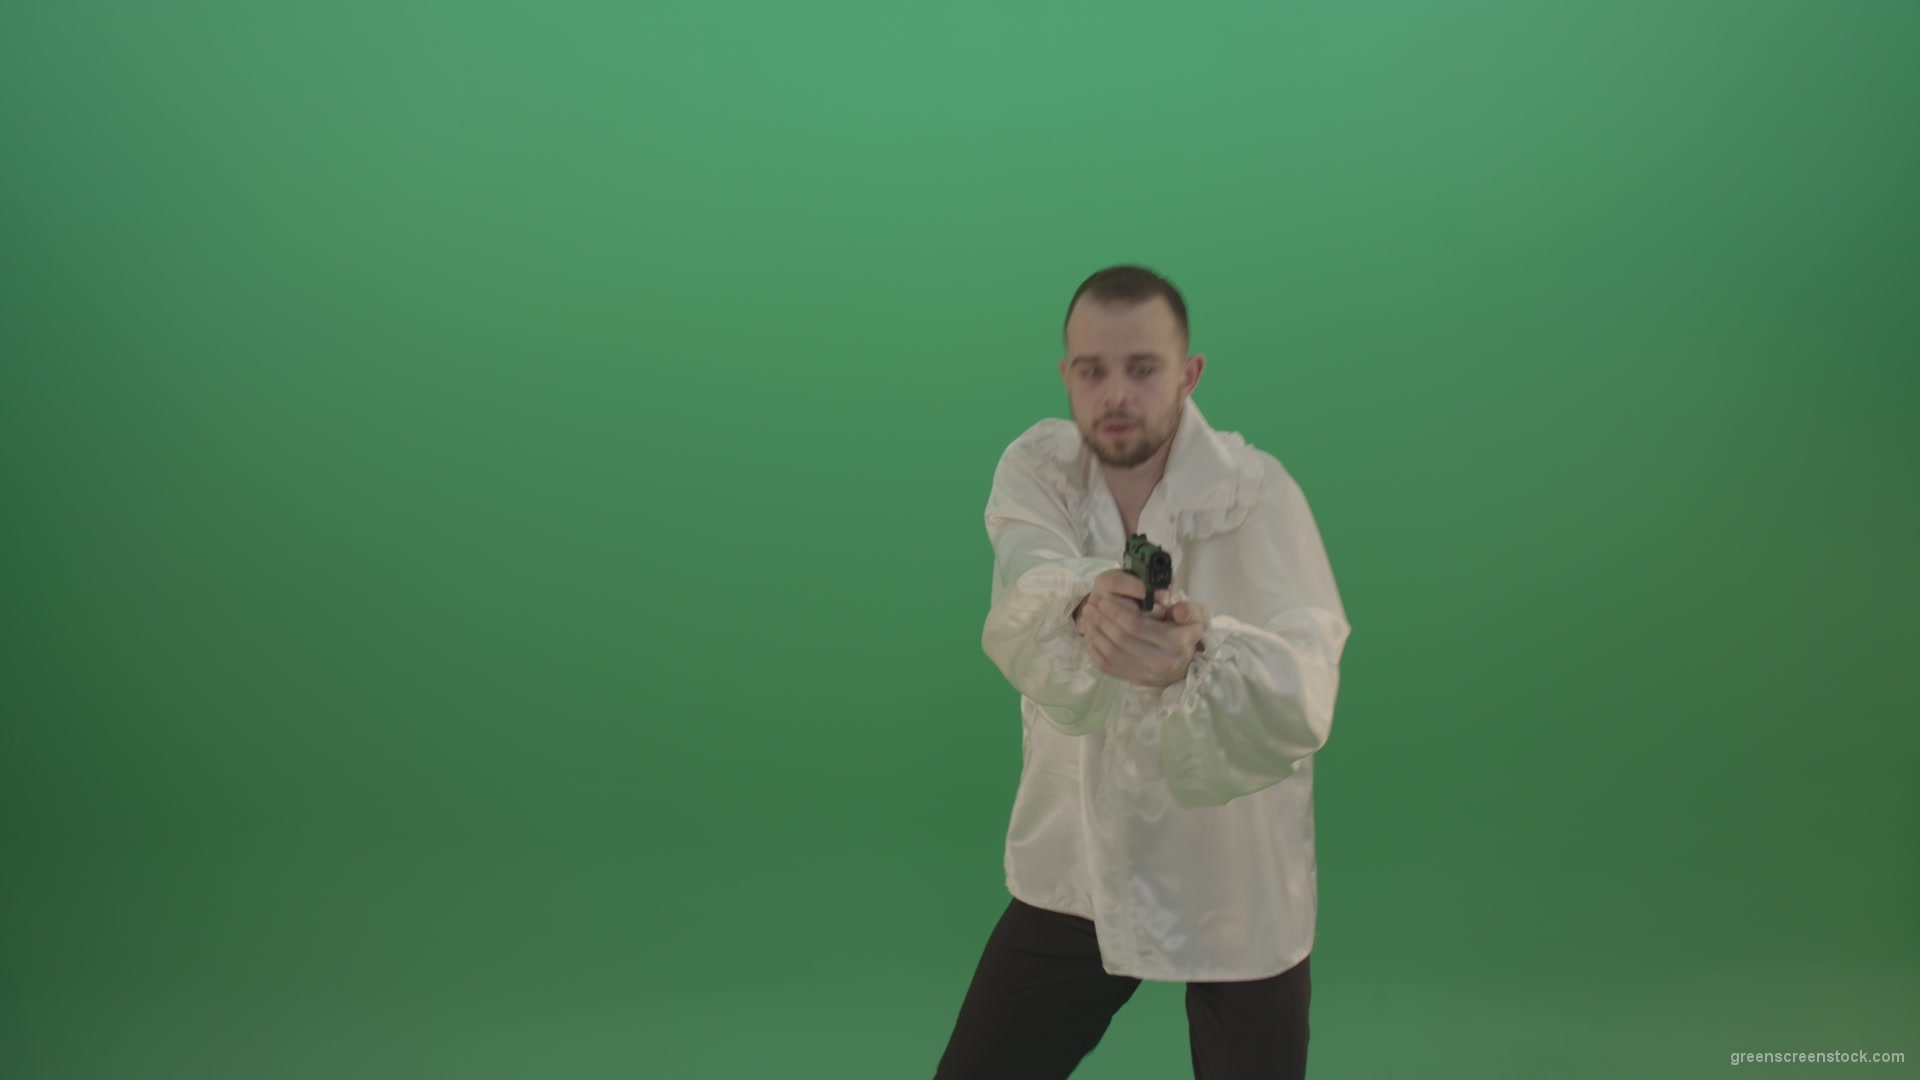 Man-in-white-shirt-shooting-with-pistol-hand-gun-isolated-in-green-screen-studio_008 Green Screen Stock